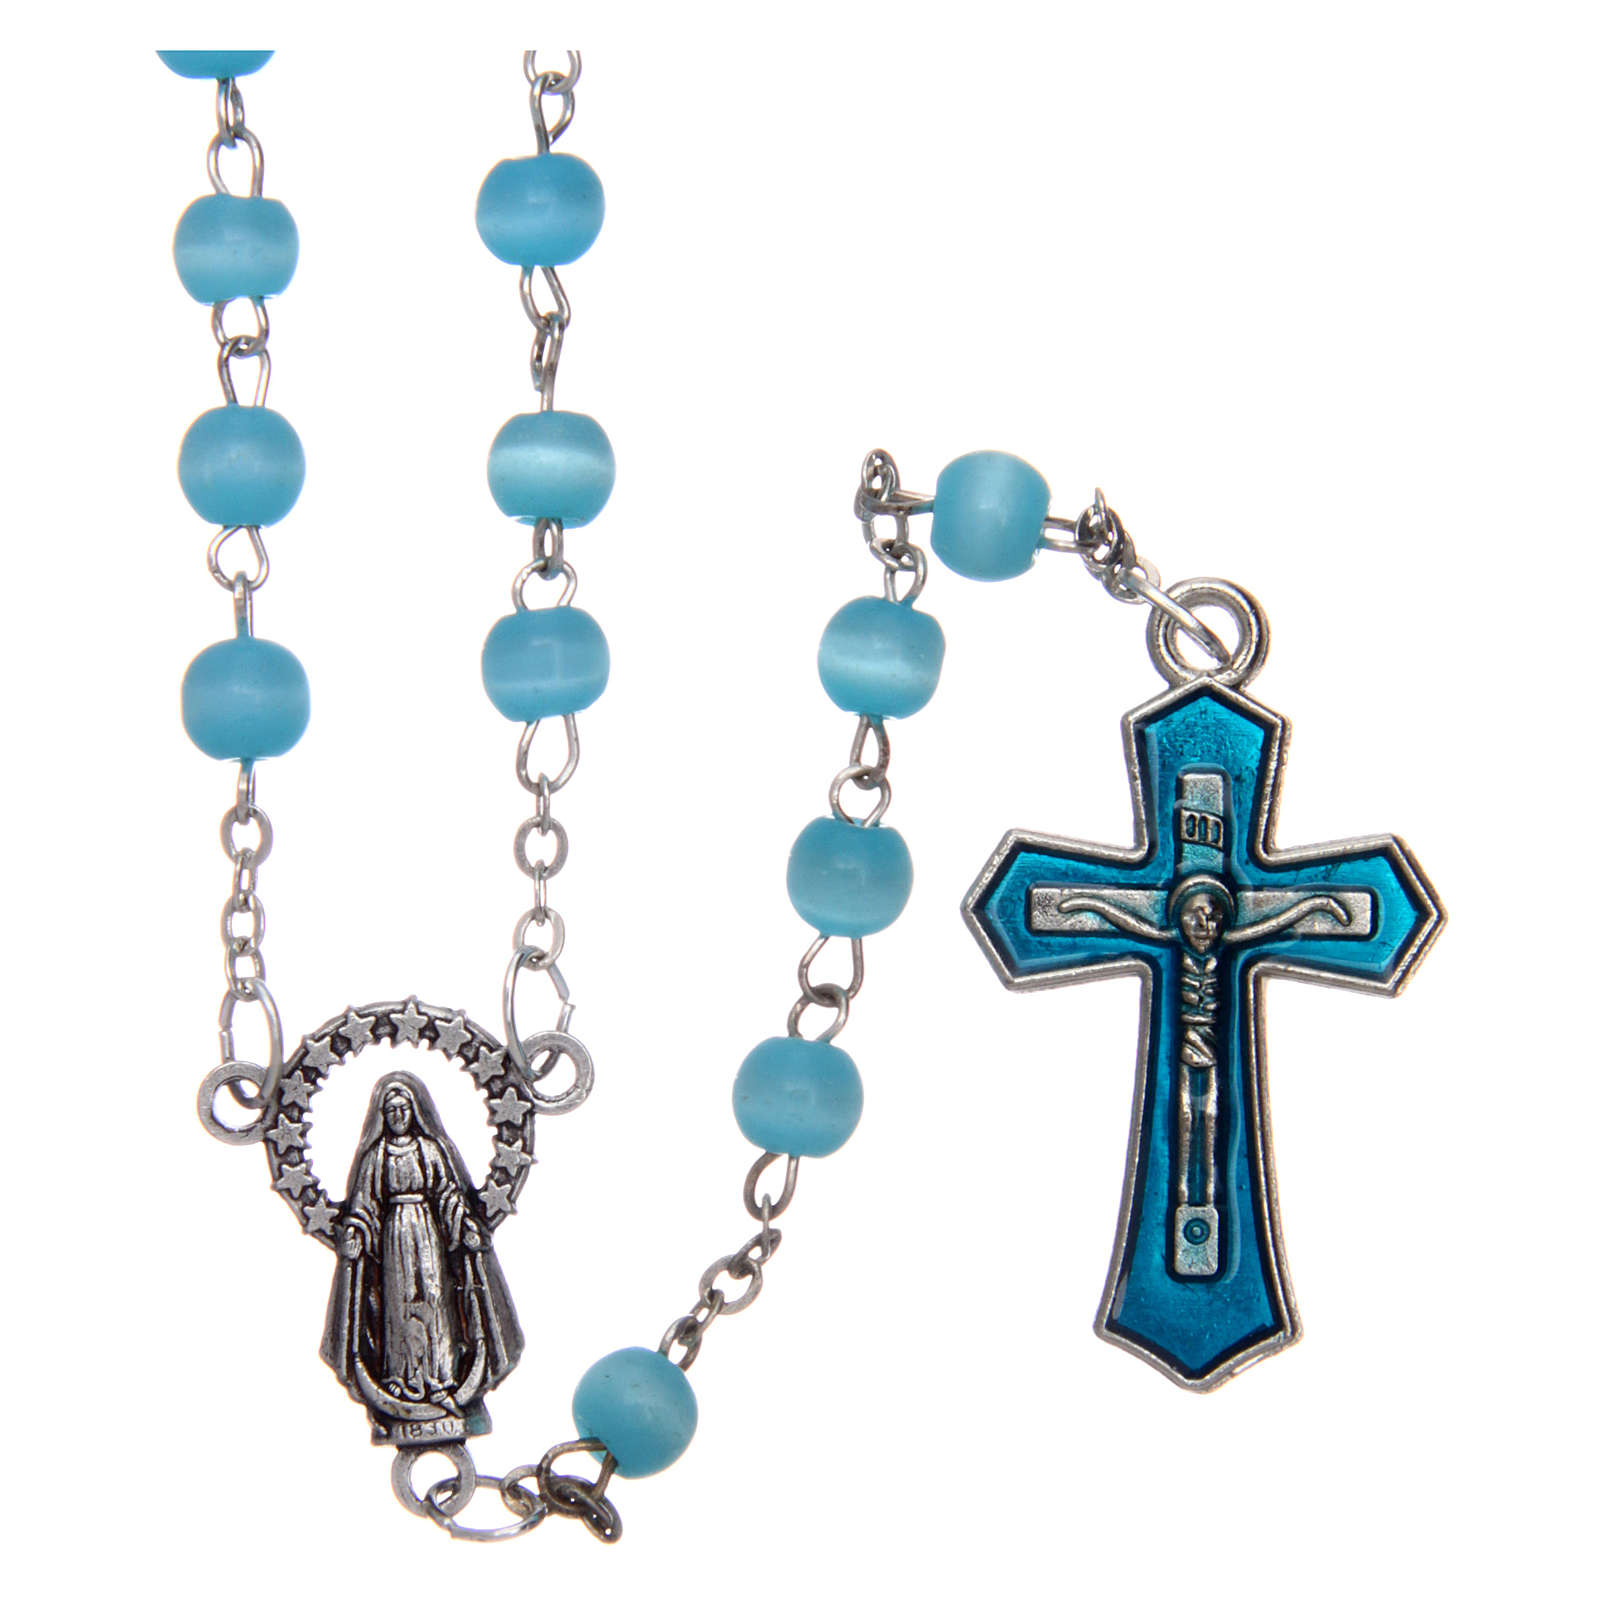 Glass rosary with round light blue beads 5 mm | online sales on HOLYART ...